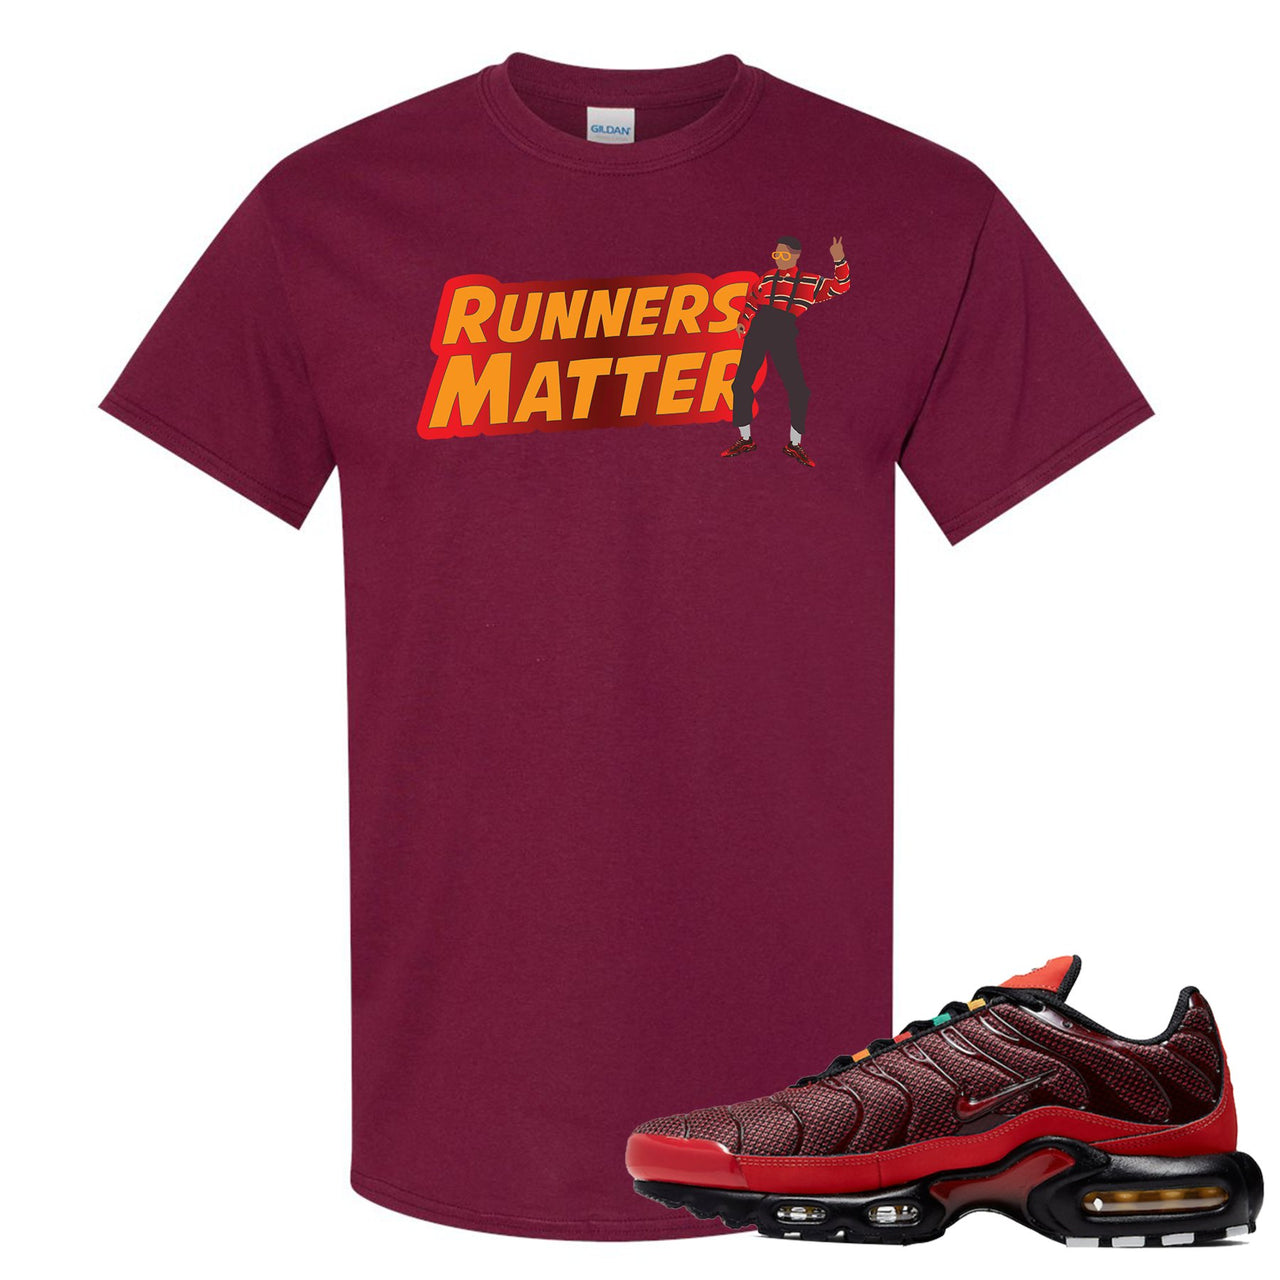 printed on the front of the air max plus sunburst sneaker matching maroon tee shirt is the runners matter logo